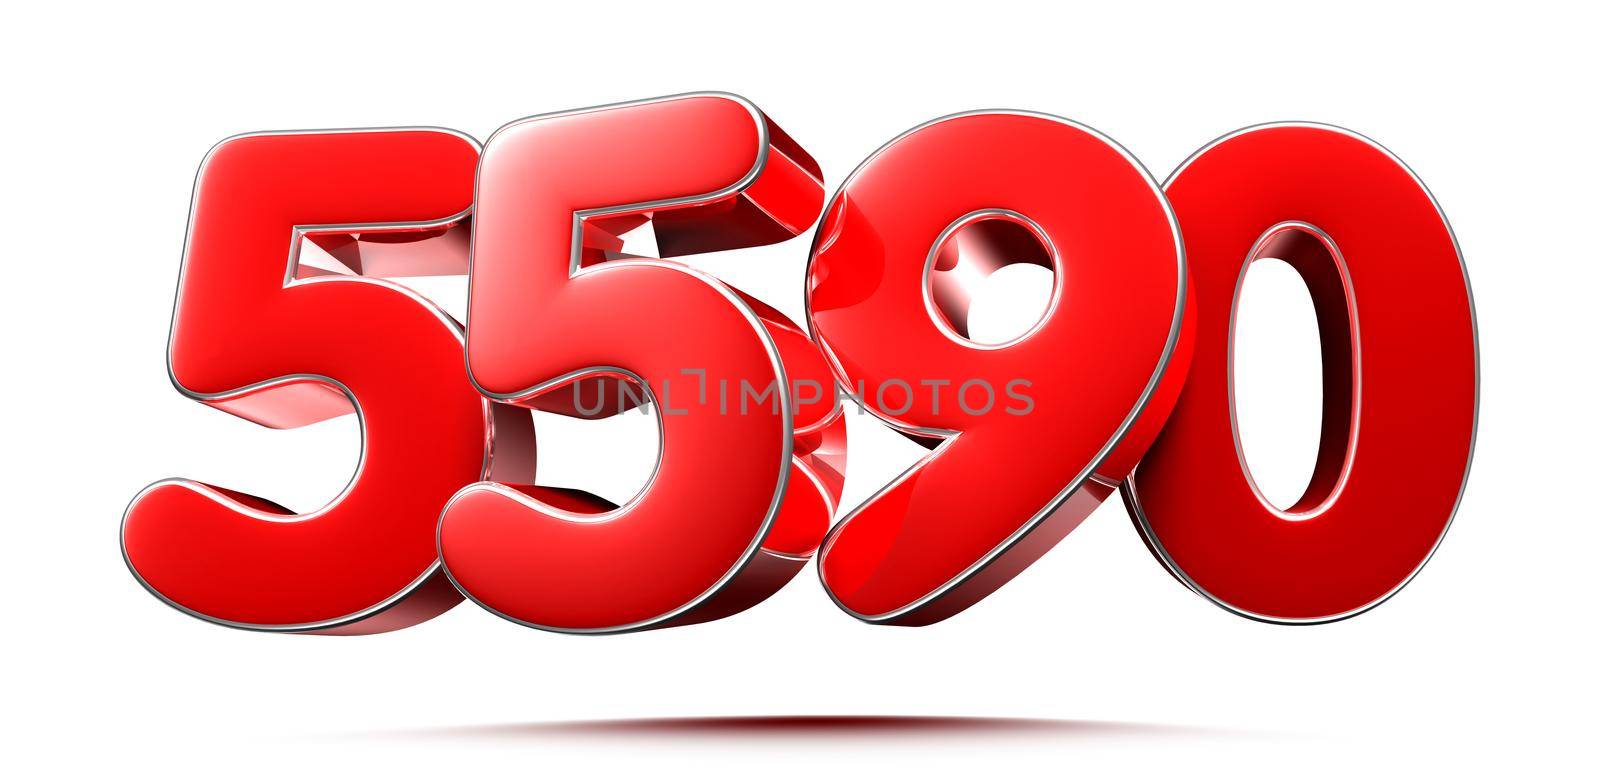 Rounded red numbers 5590 on white background 3D illustration with clipping path